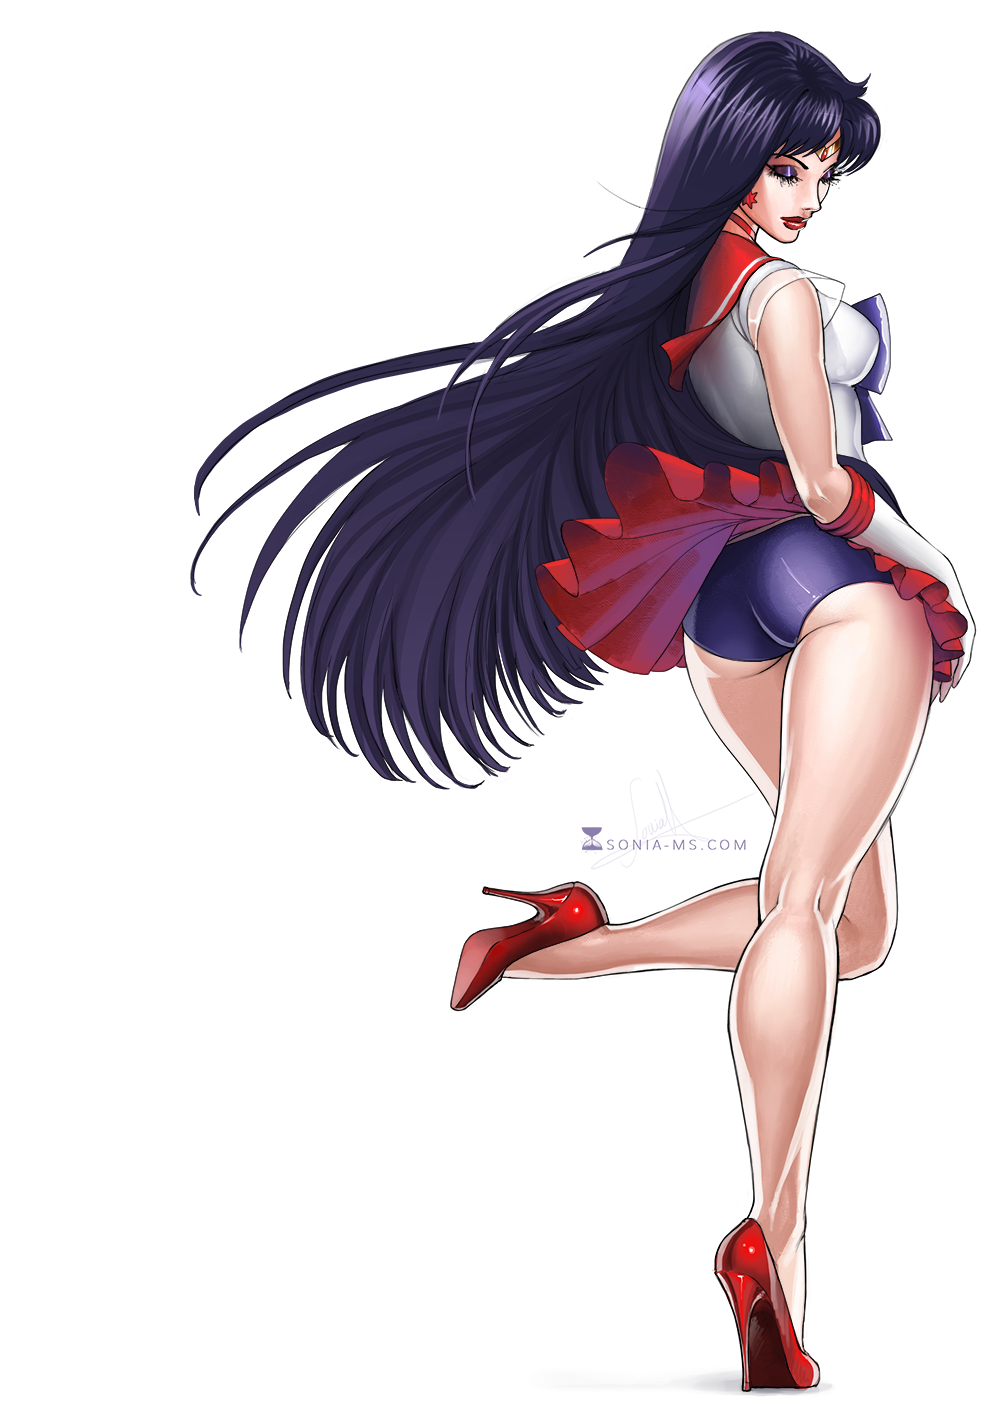 STICKER DECAL 4 Different Sizes Available Details about SAILOR MOON SAILOR MARS...